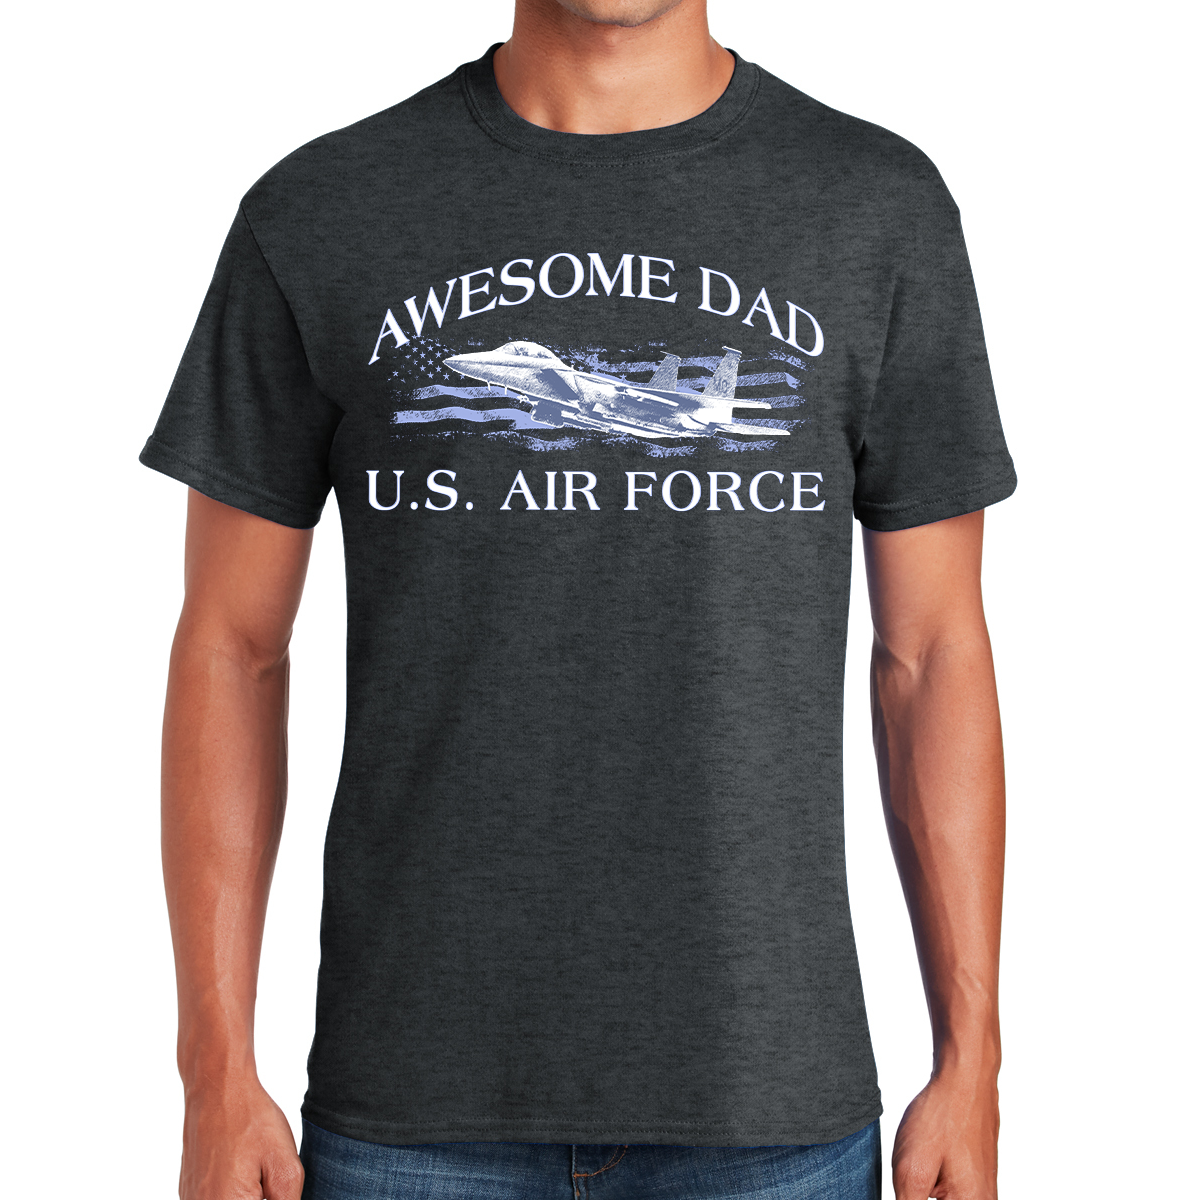 Awesome Dad Air Force Soaring To New Heights In Fatherhood Gift For Dads T-shirt